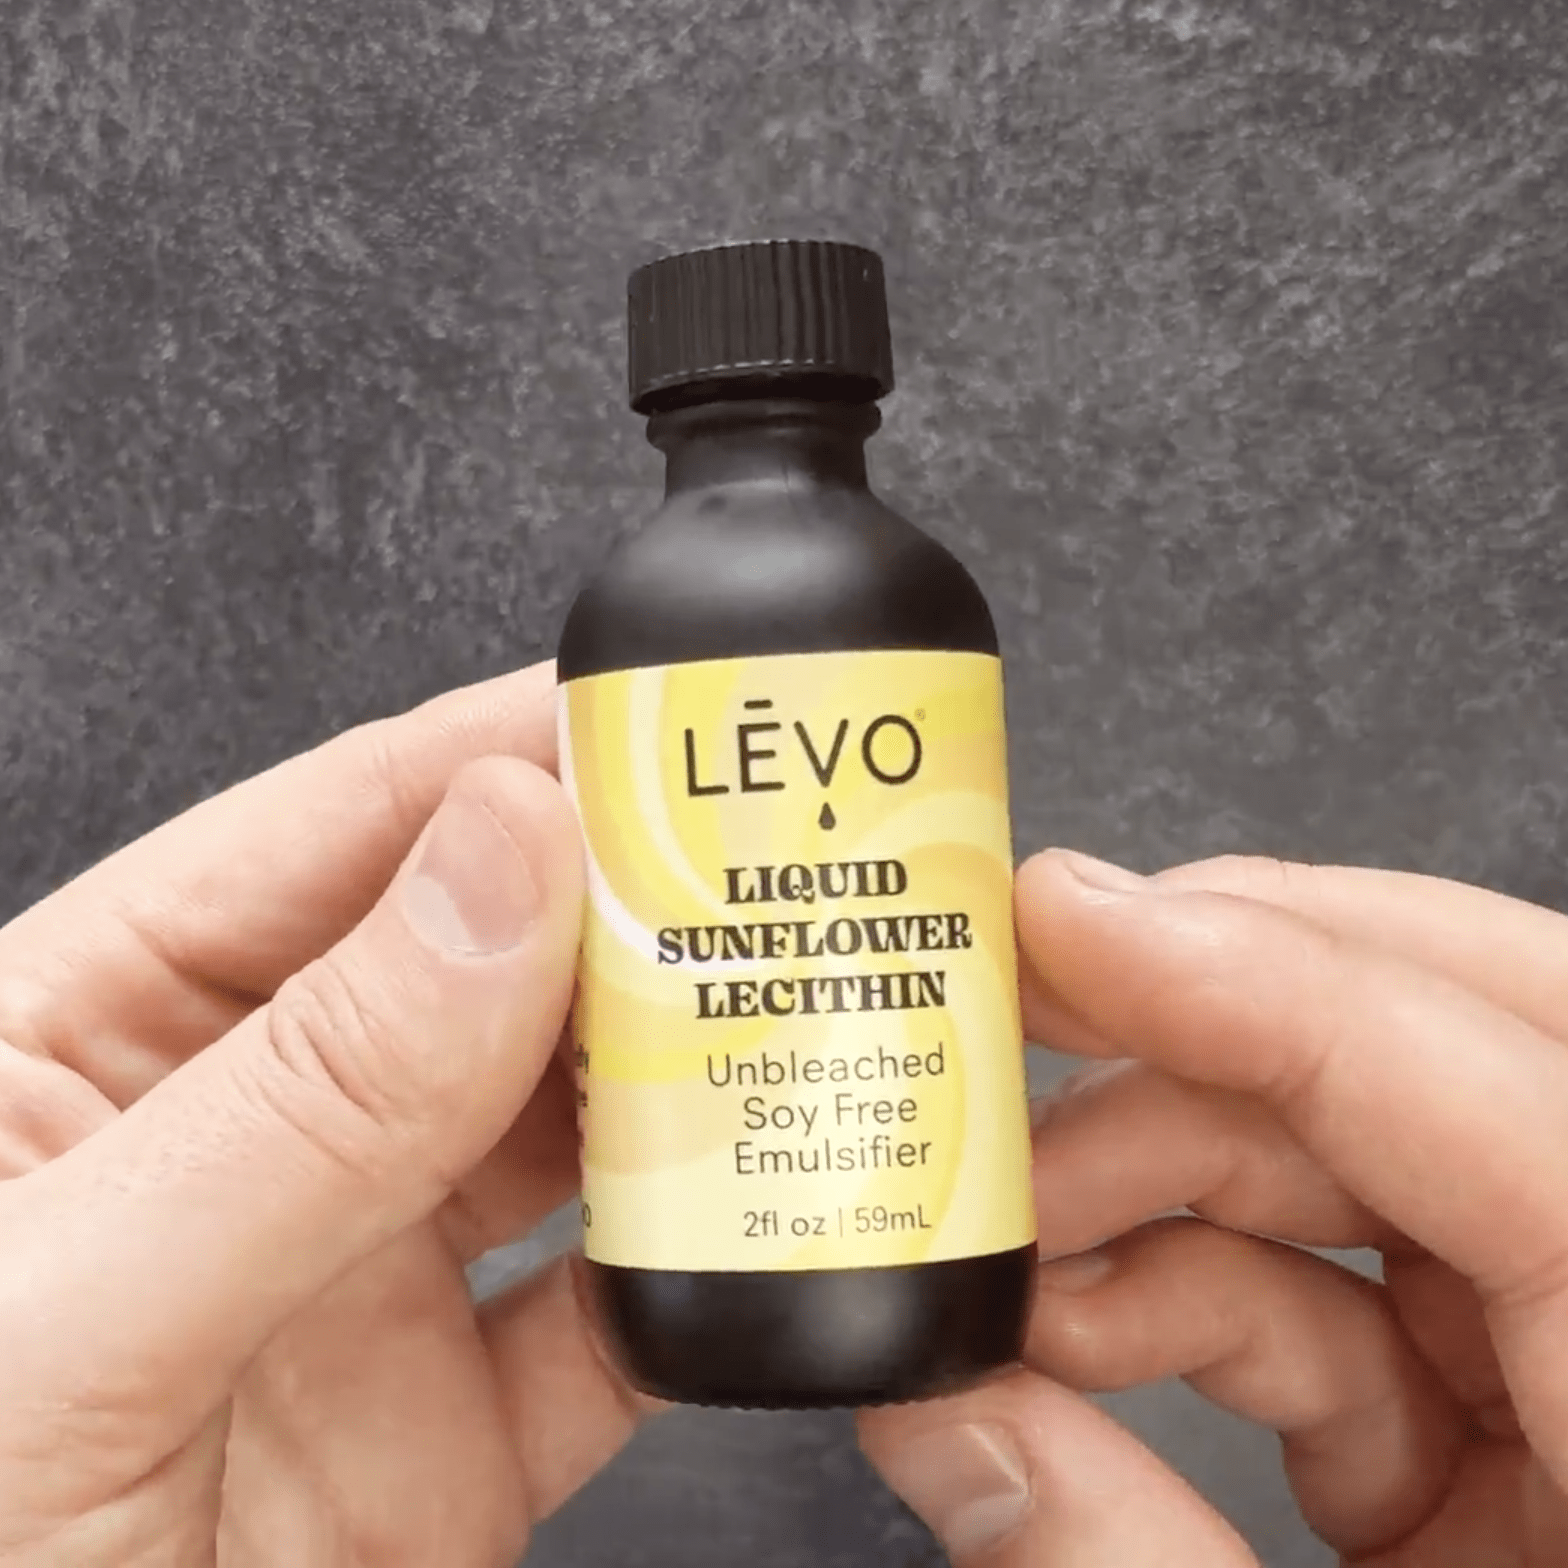 LEVO sunflower lecithin can be added directly to your LEVO reservoir when infusing.